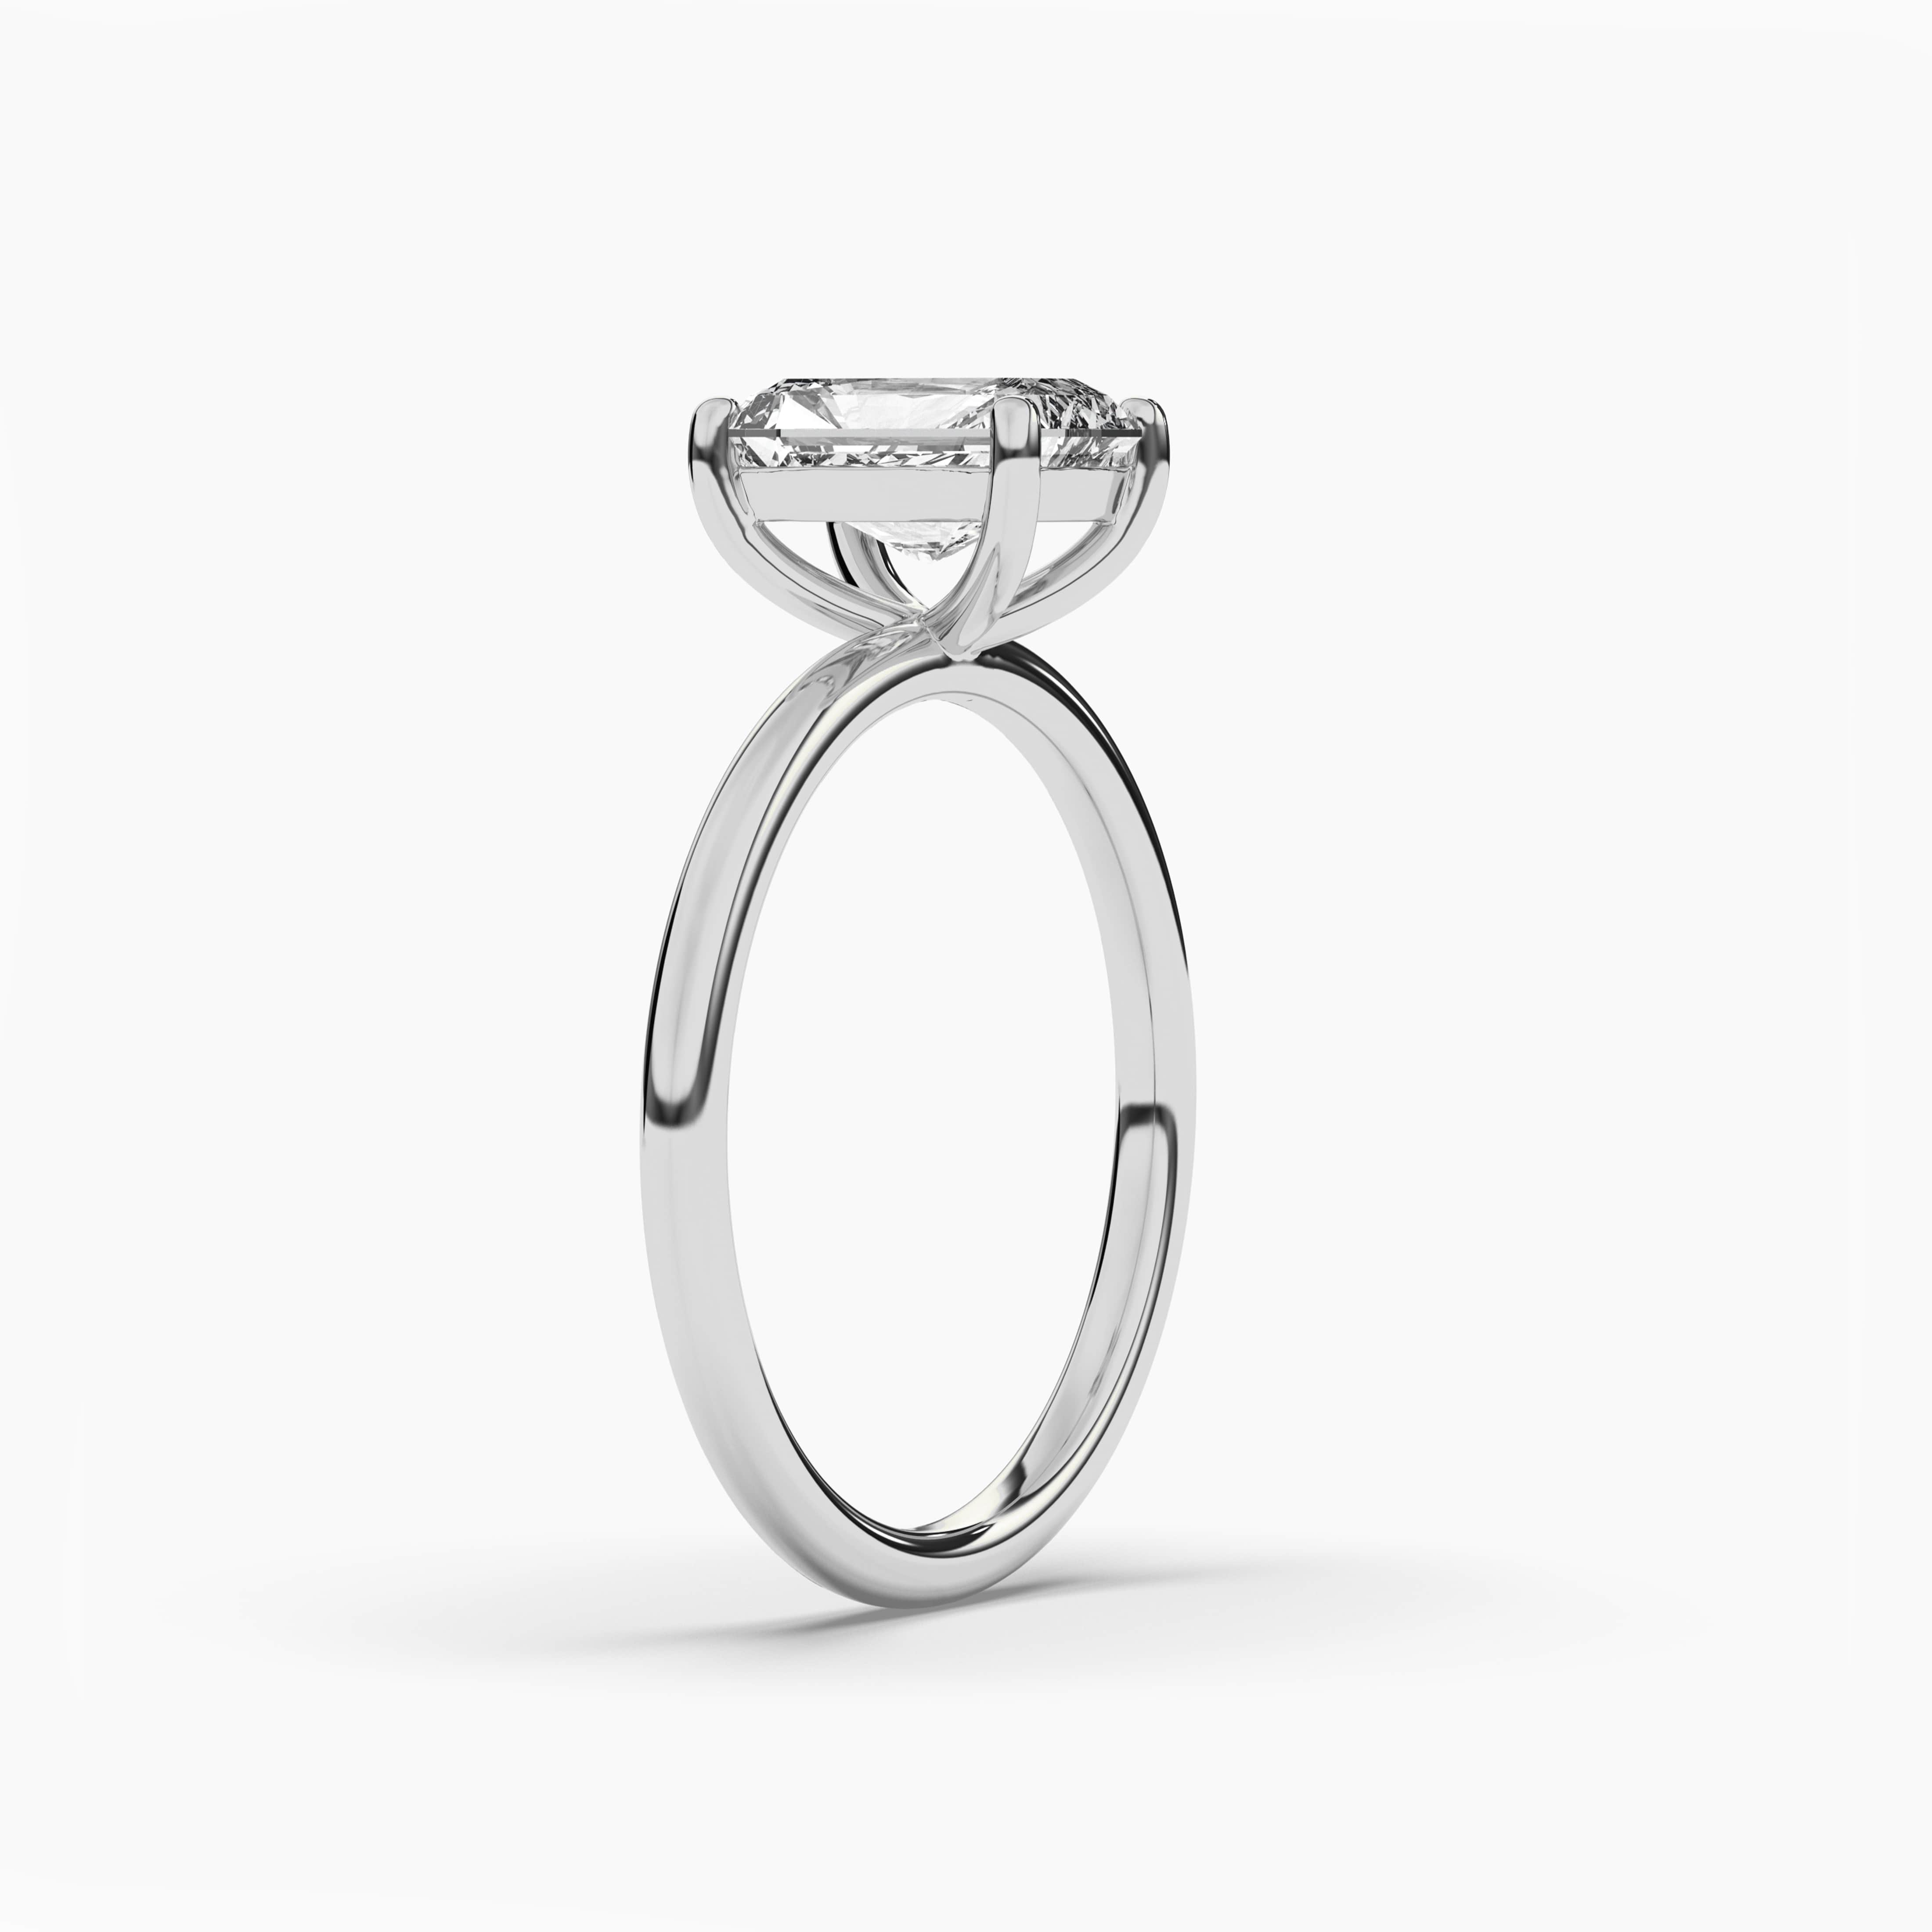 Radiant-Cut Engagement Rings in white gold